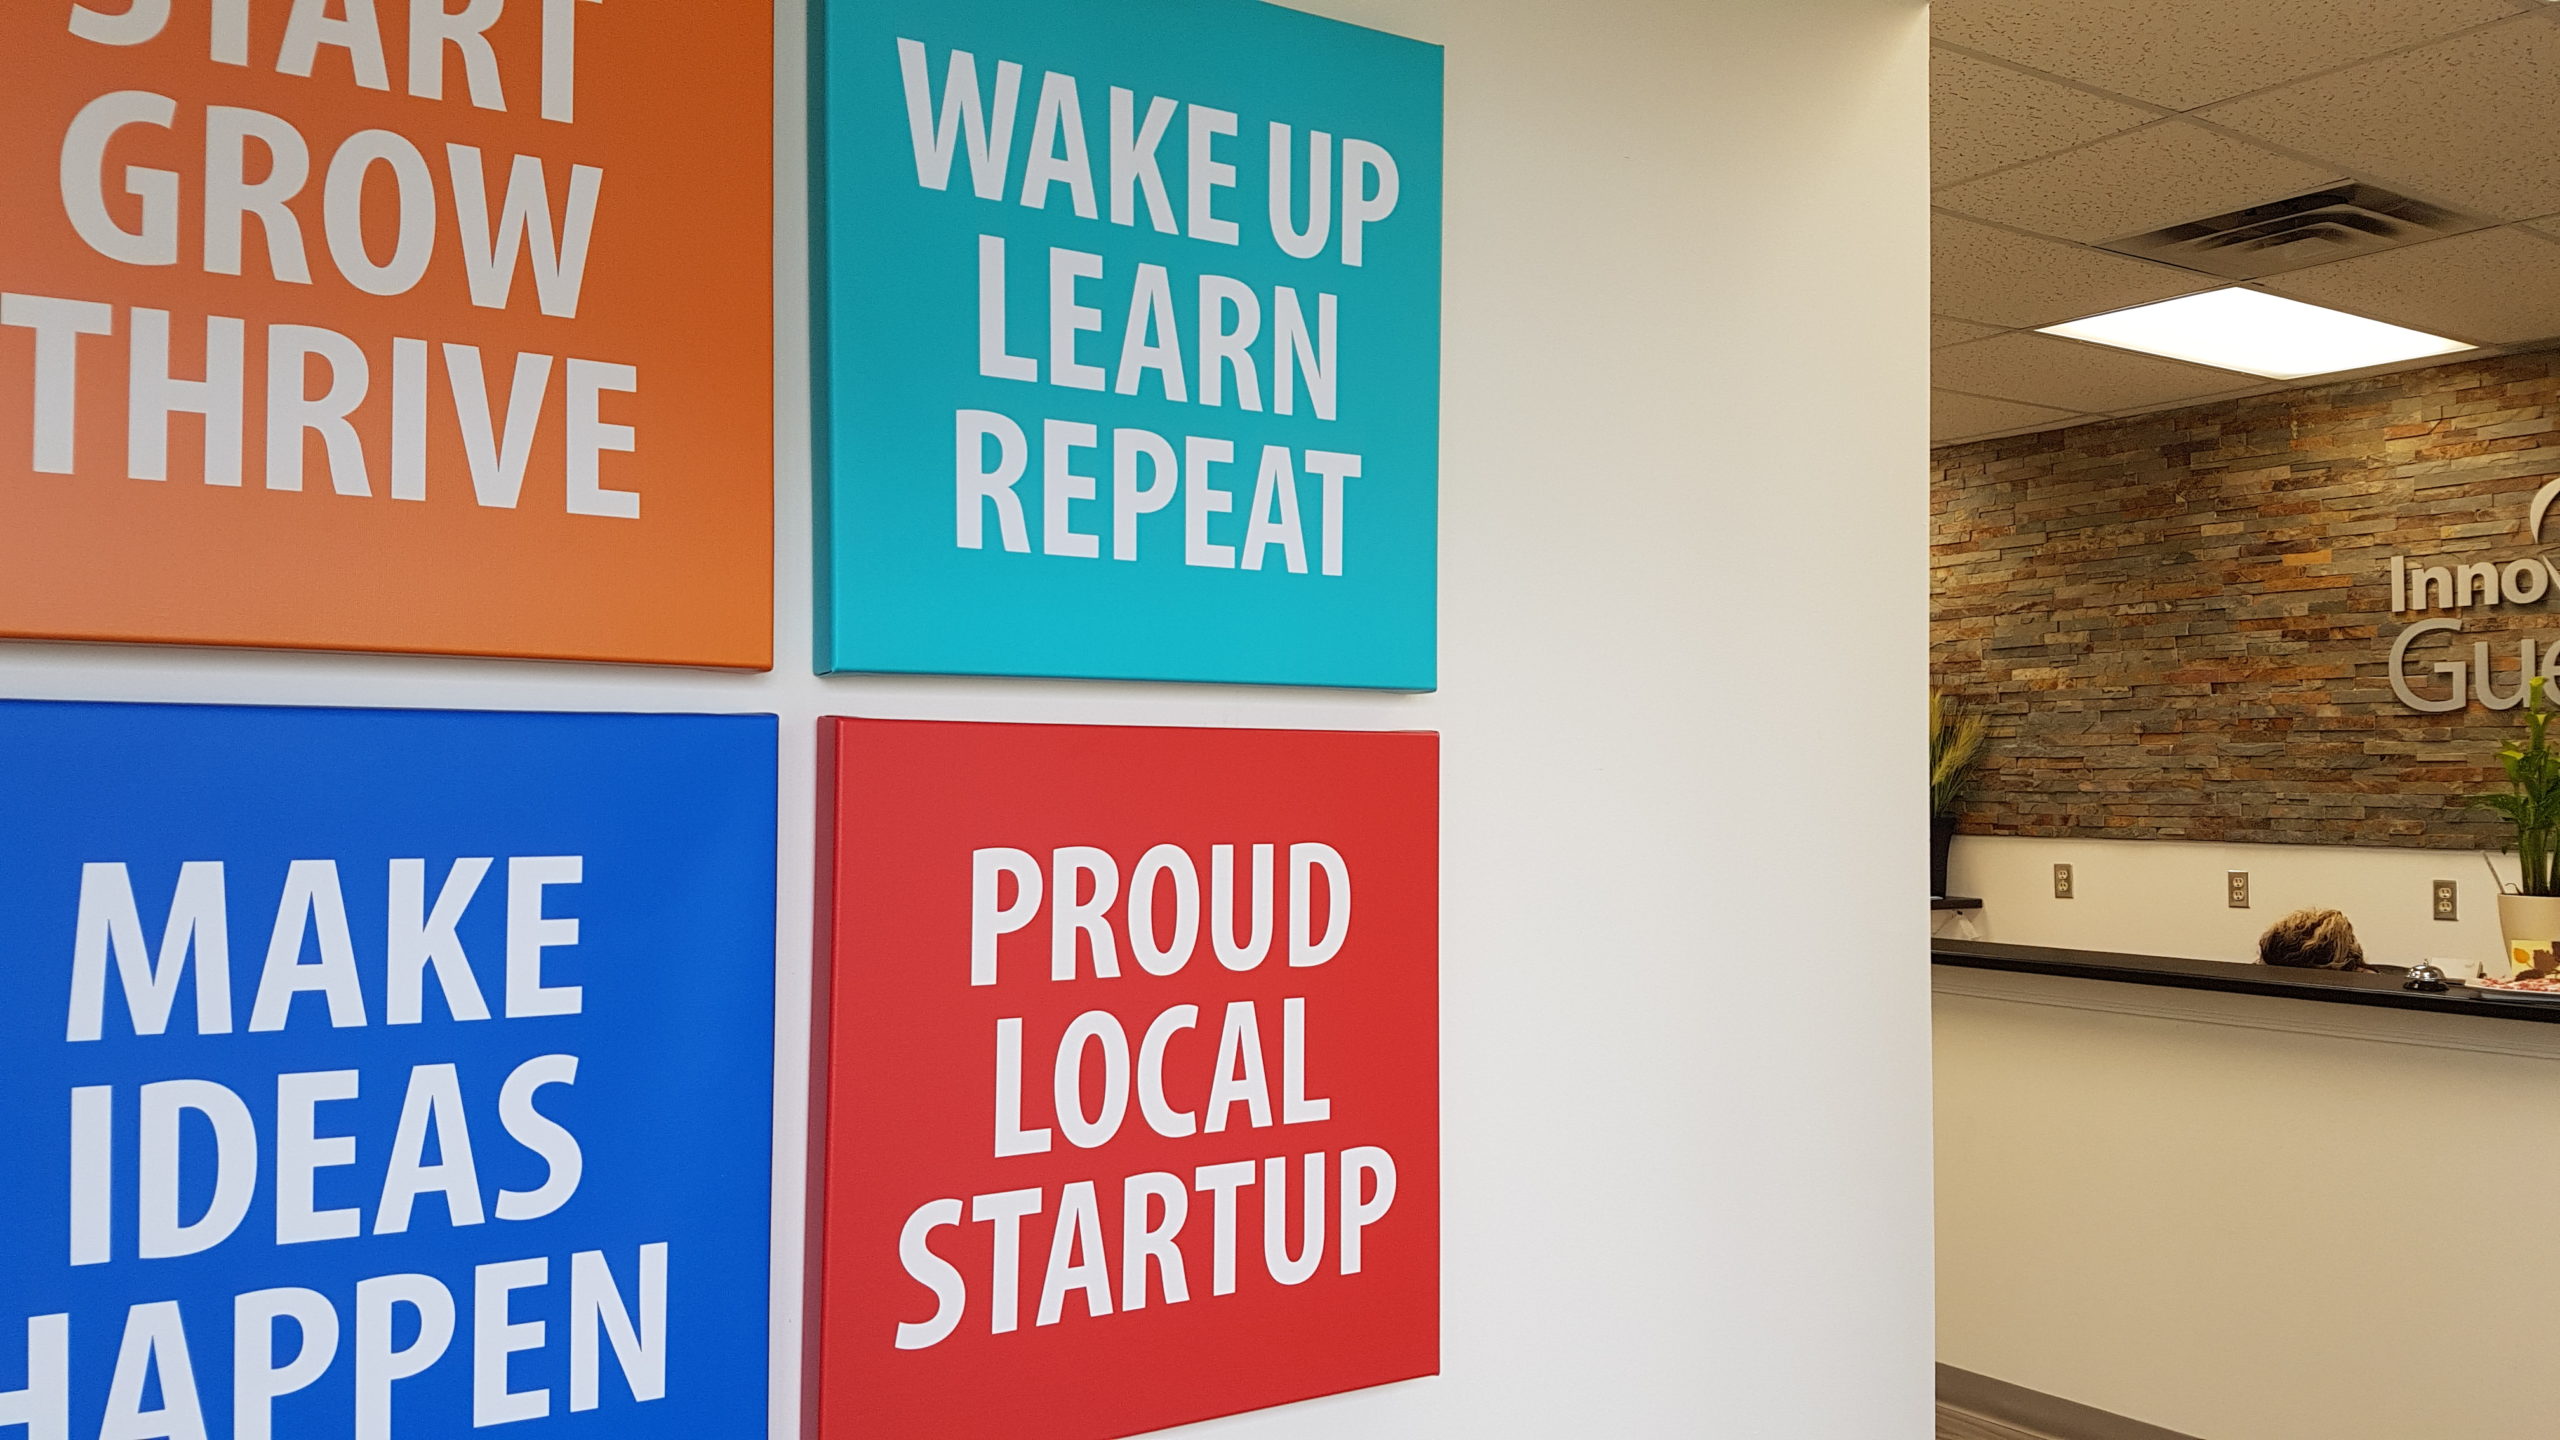 interior office of innovation guelph. Motivational signs on the wall say Proud Local Start up, wake up learn repeat, make ideas happen, start grow thrive.